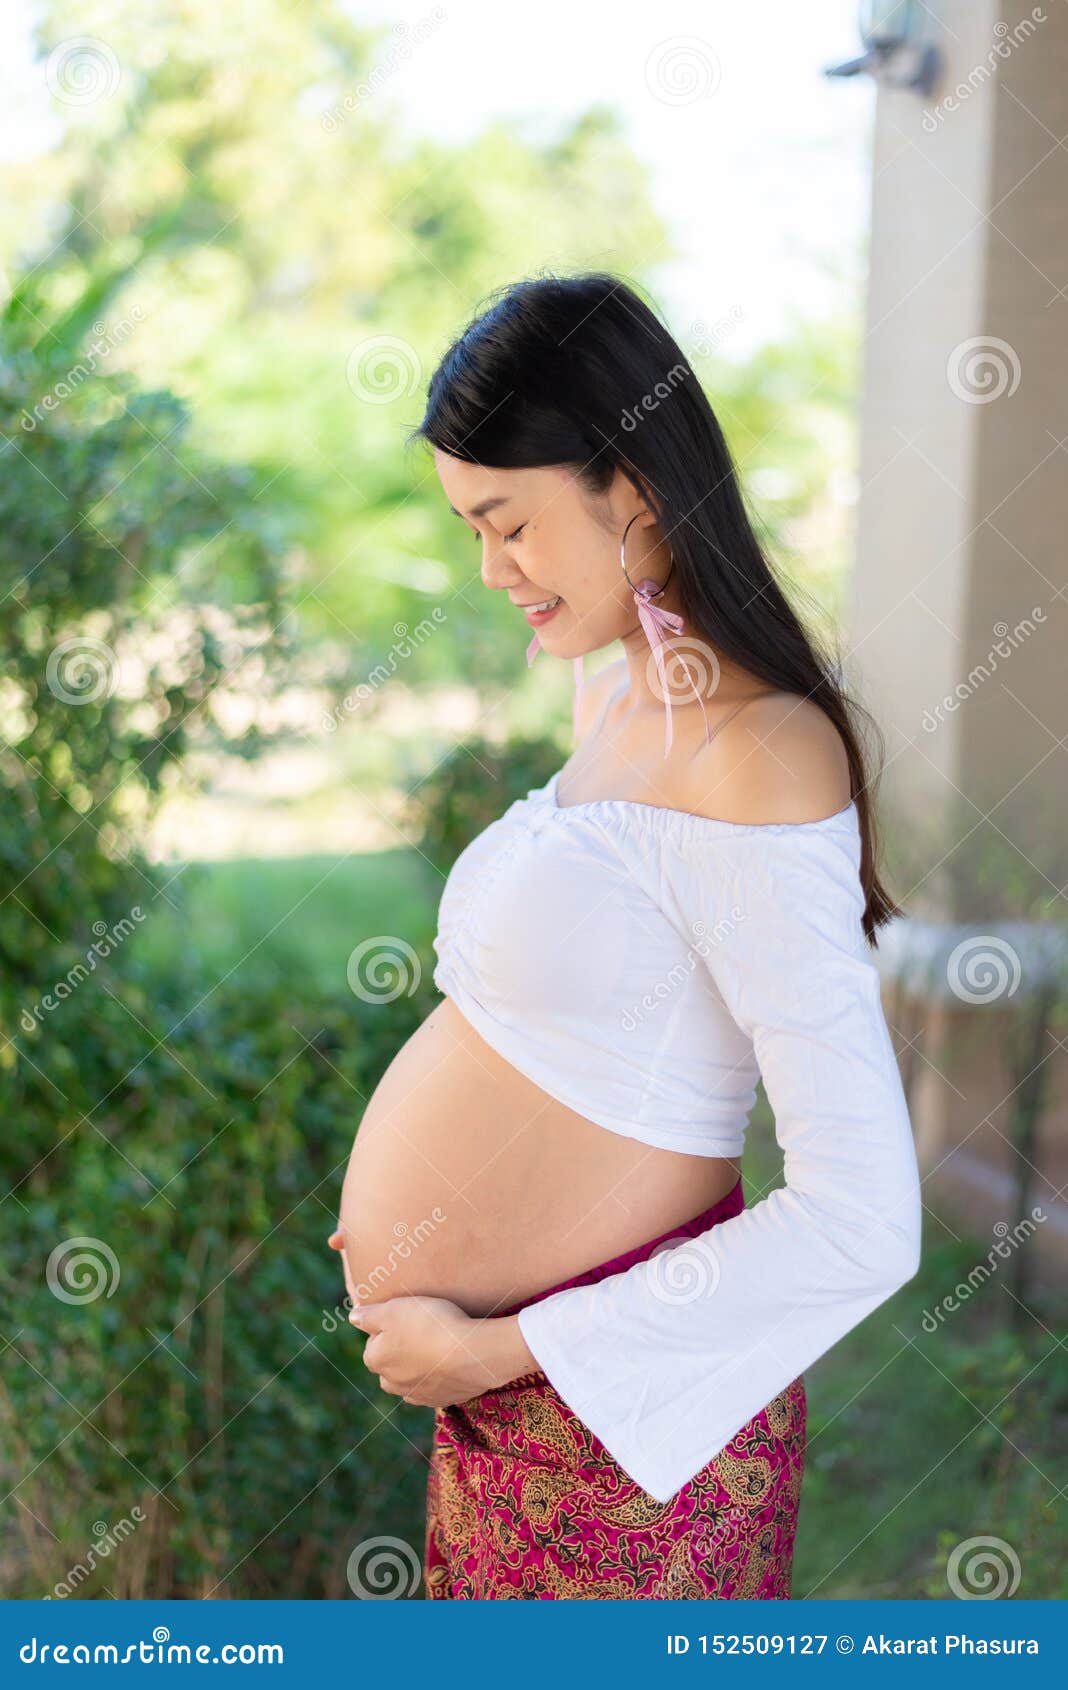 Young Asian Beautiful Pregnant Woman In White Dress Touching Her Belly